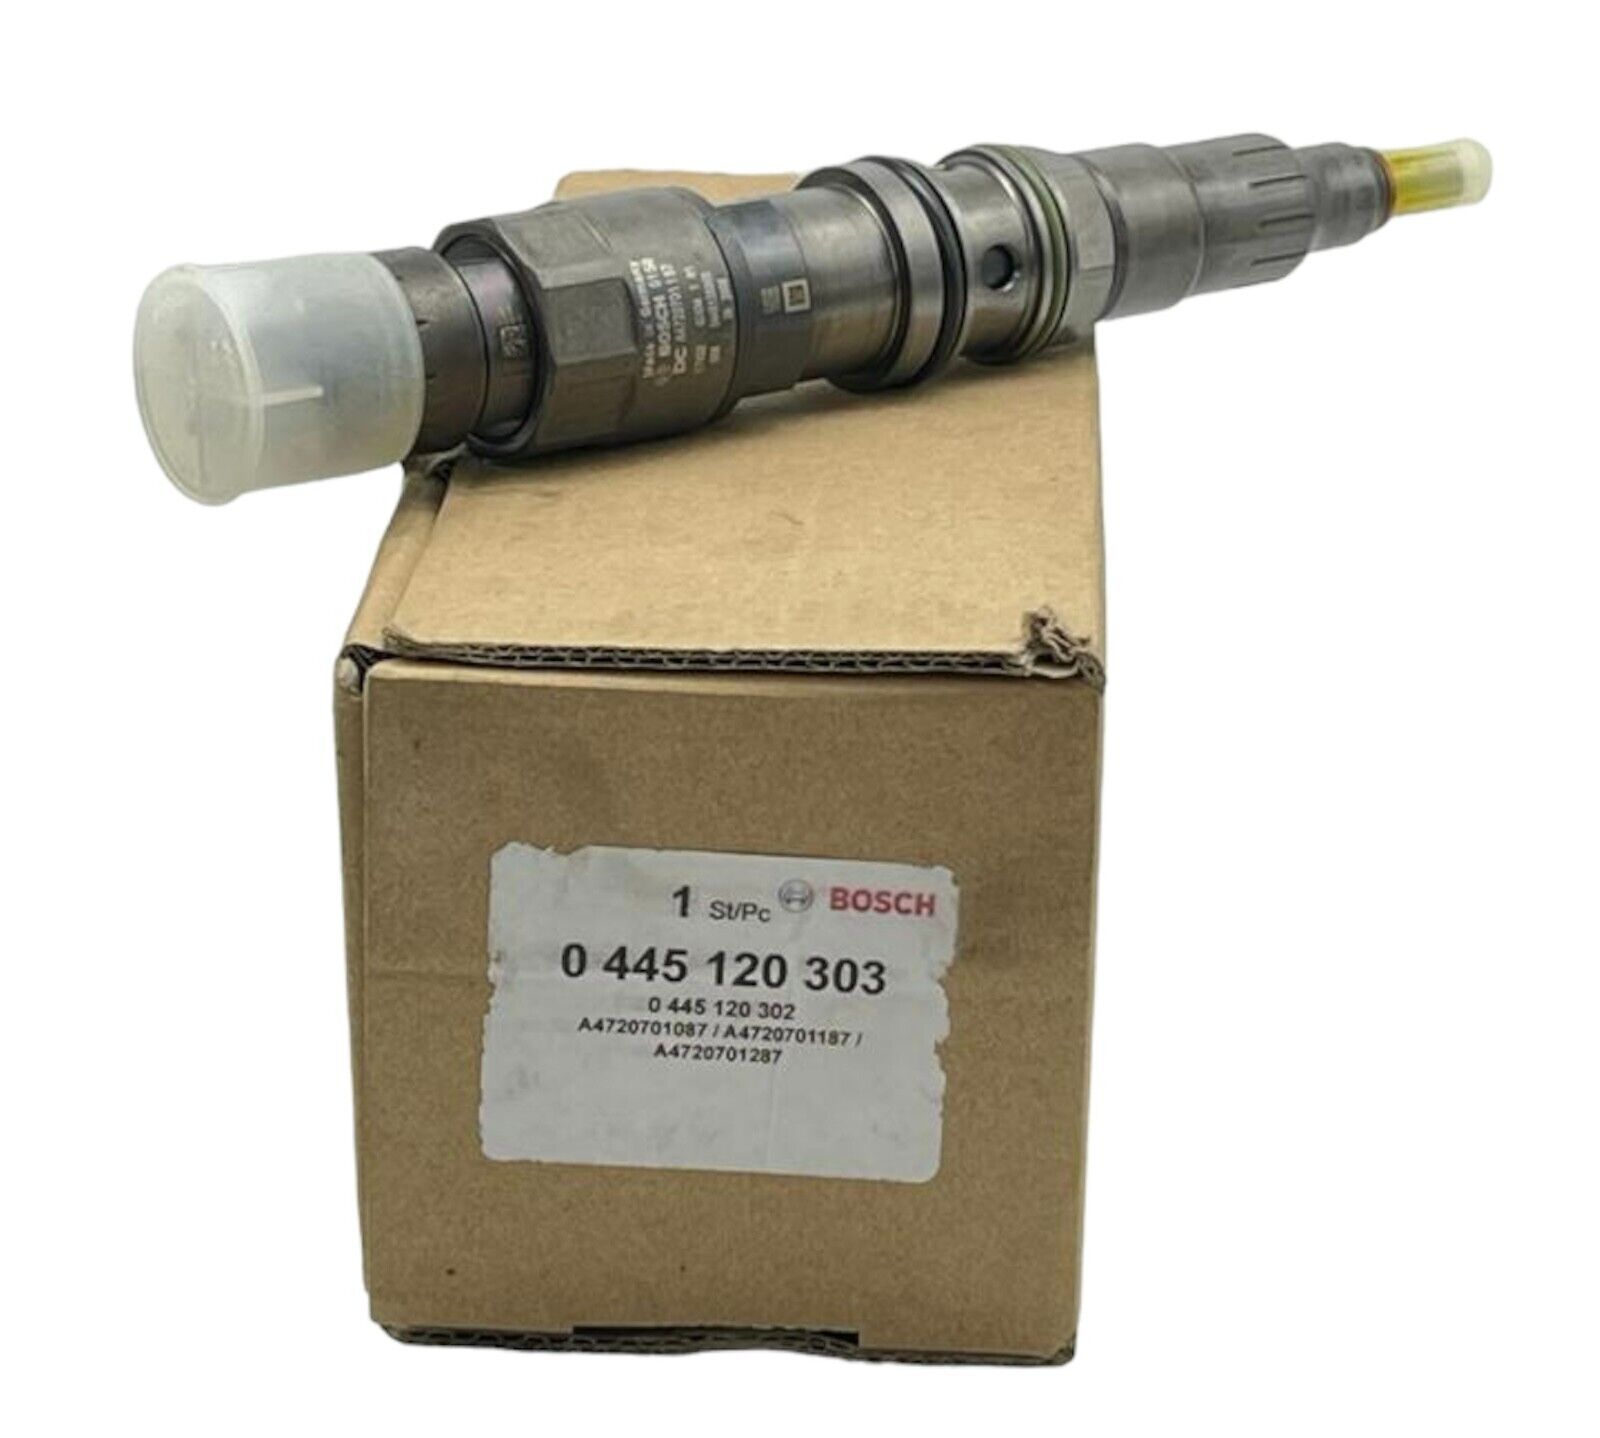 BOSCH FUEL INJECTOR For DETROIT DD15, A4720701287 4720701187